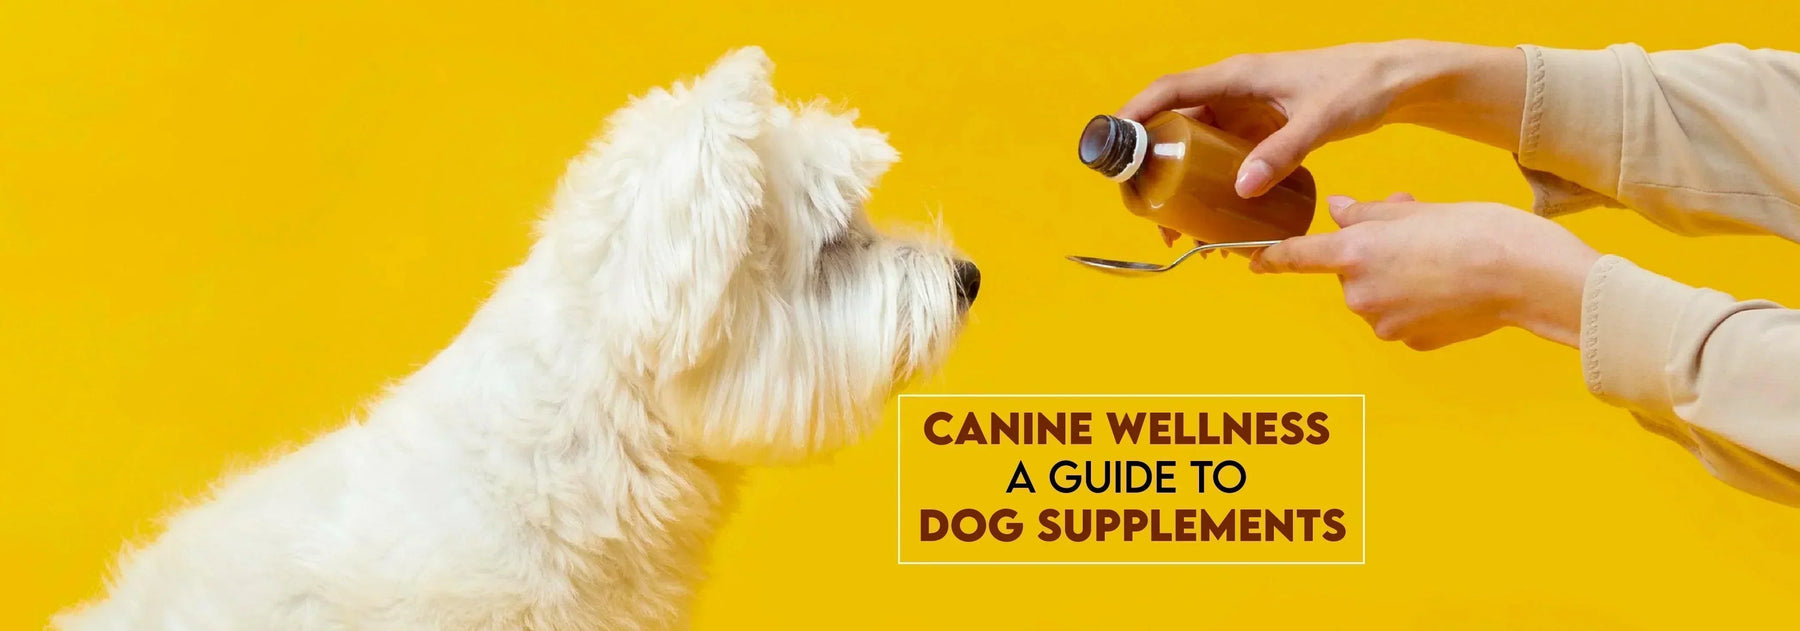 Optimizing Canine Wellness: A Guide to Dog Supplements - Ofypets